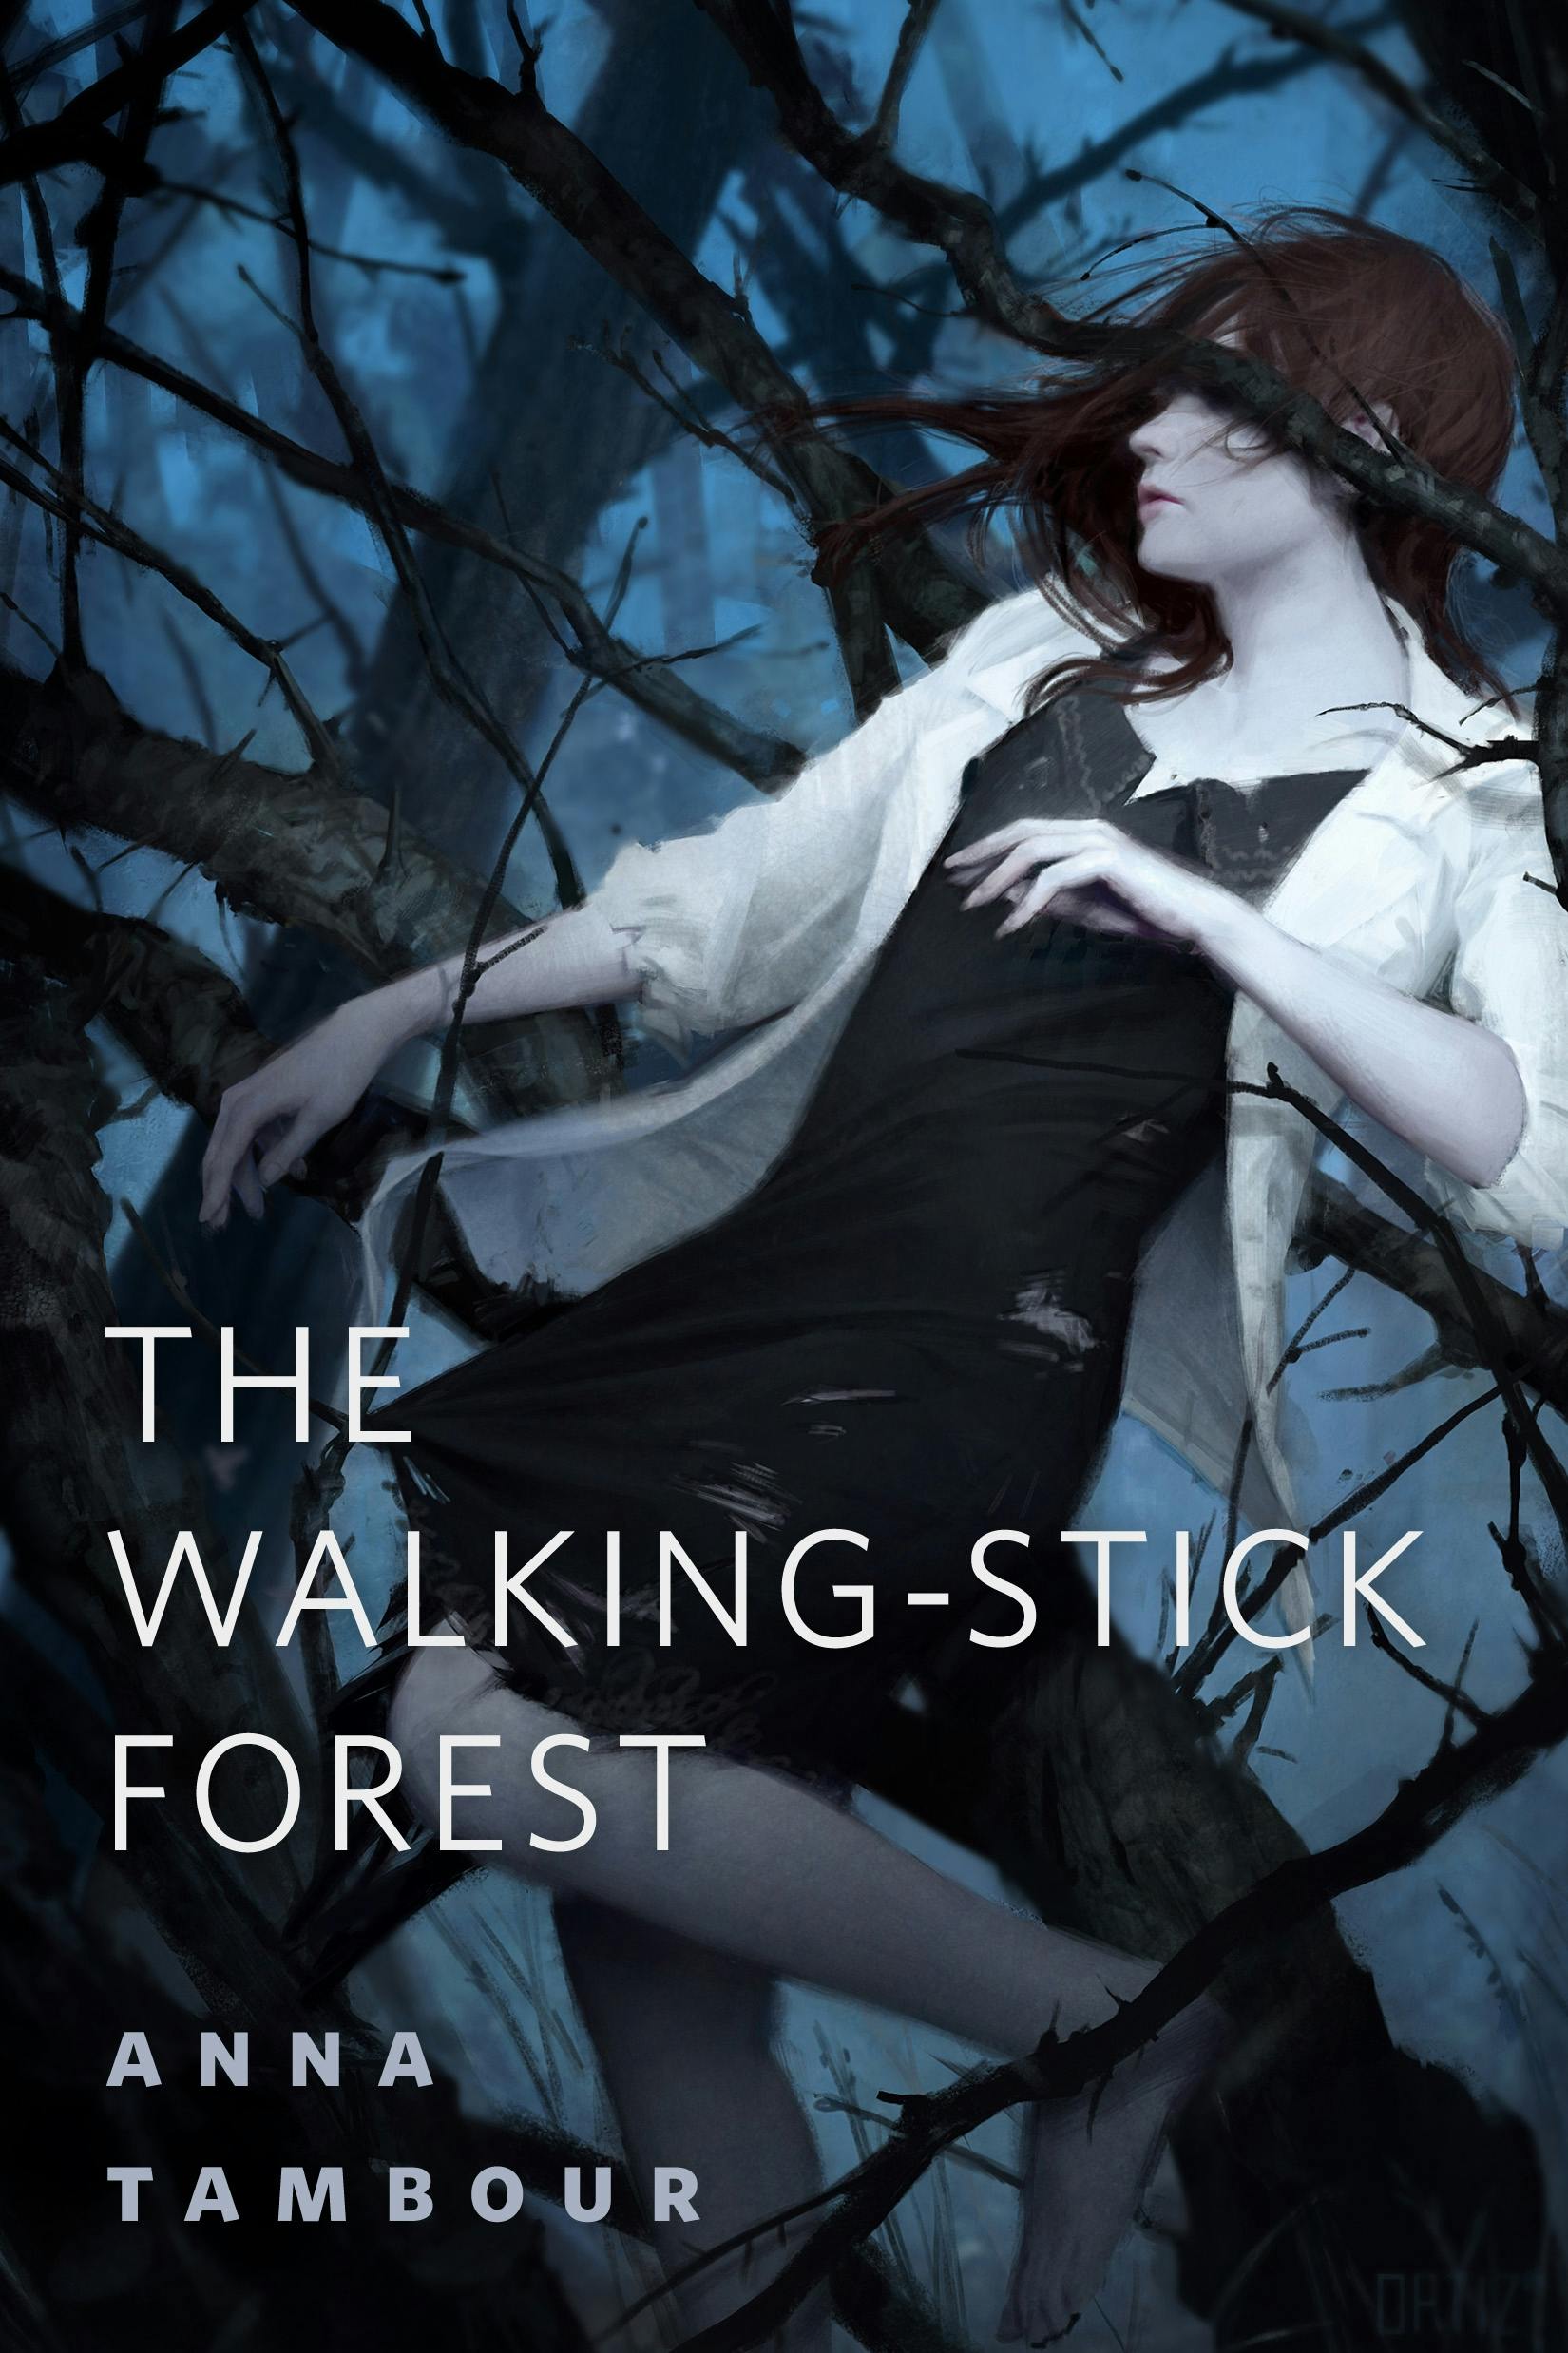 The Walking-stick Forest